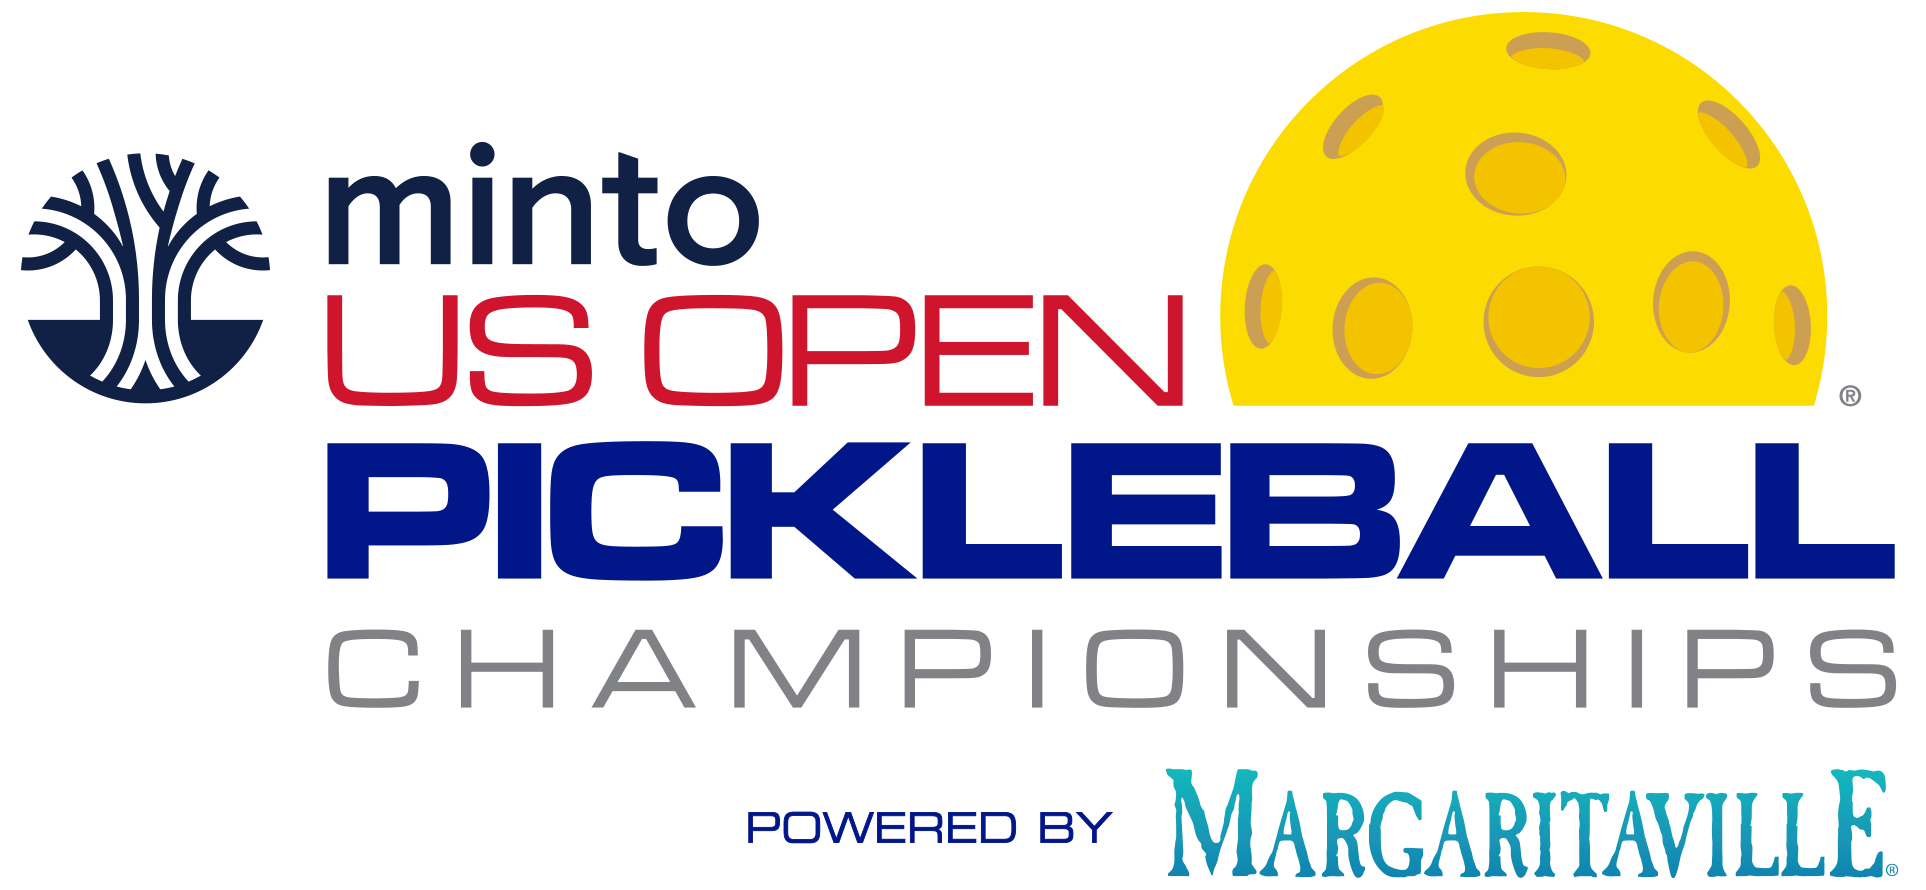 I Played In The US Pickleball Open Championship Sarasota Pickleball